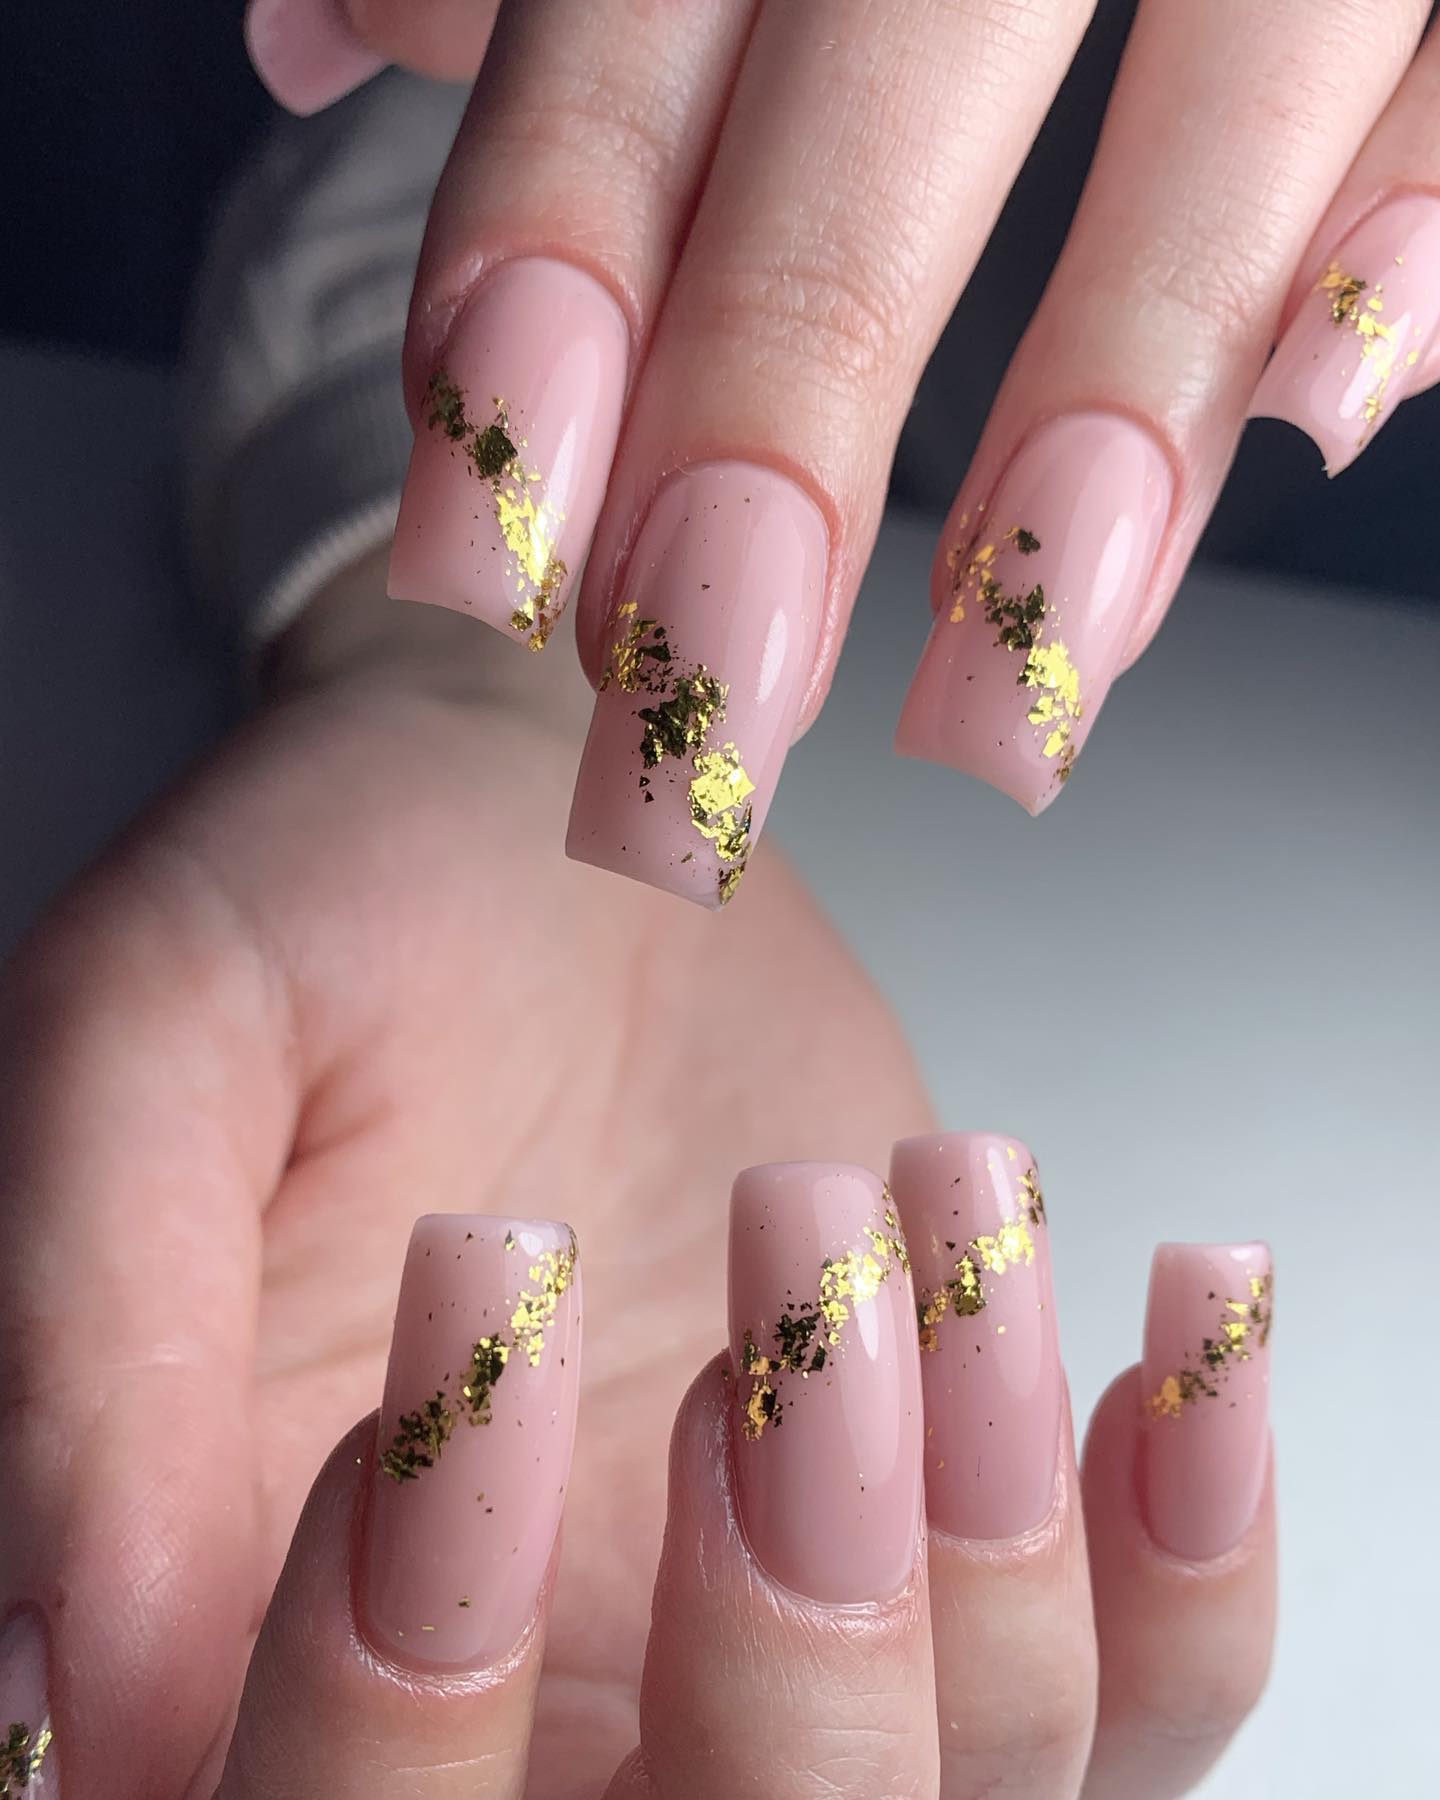 Black nails with gold leaf - YouTube